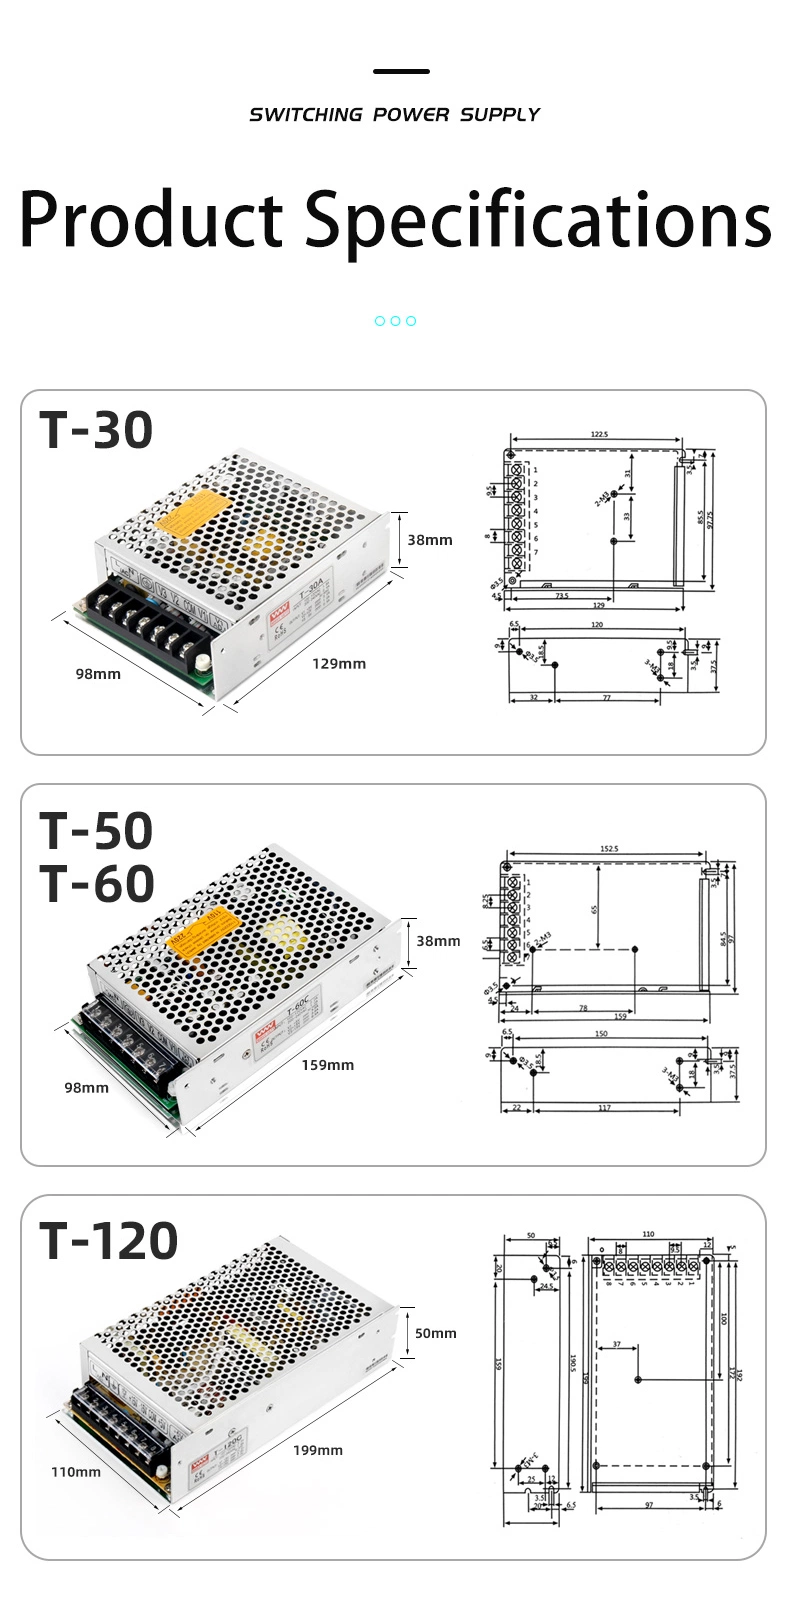 T-120b 5V 12V-12V 120W Three Group Triple Output Multi Voltage Switching Power Supply SMPS 3.5A -15V 1A